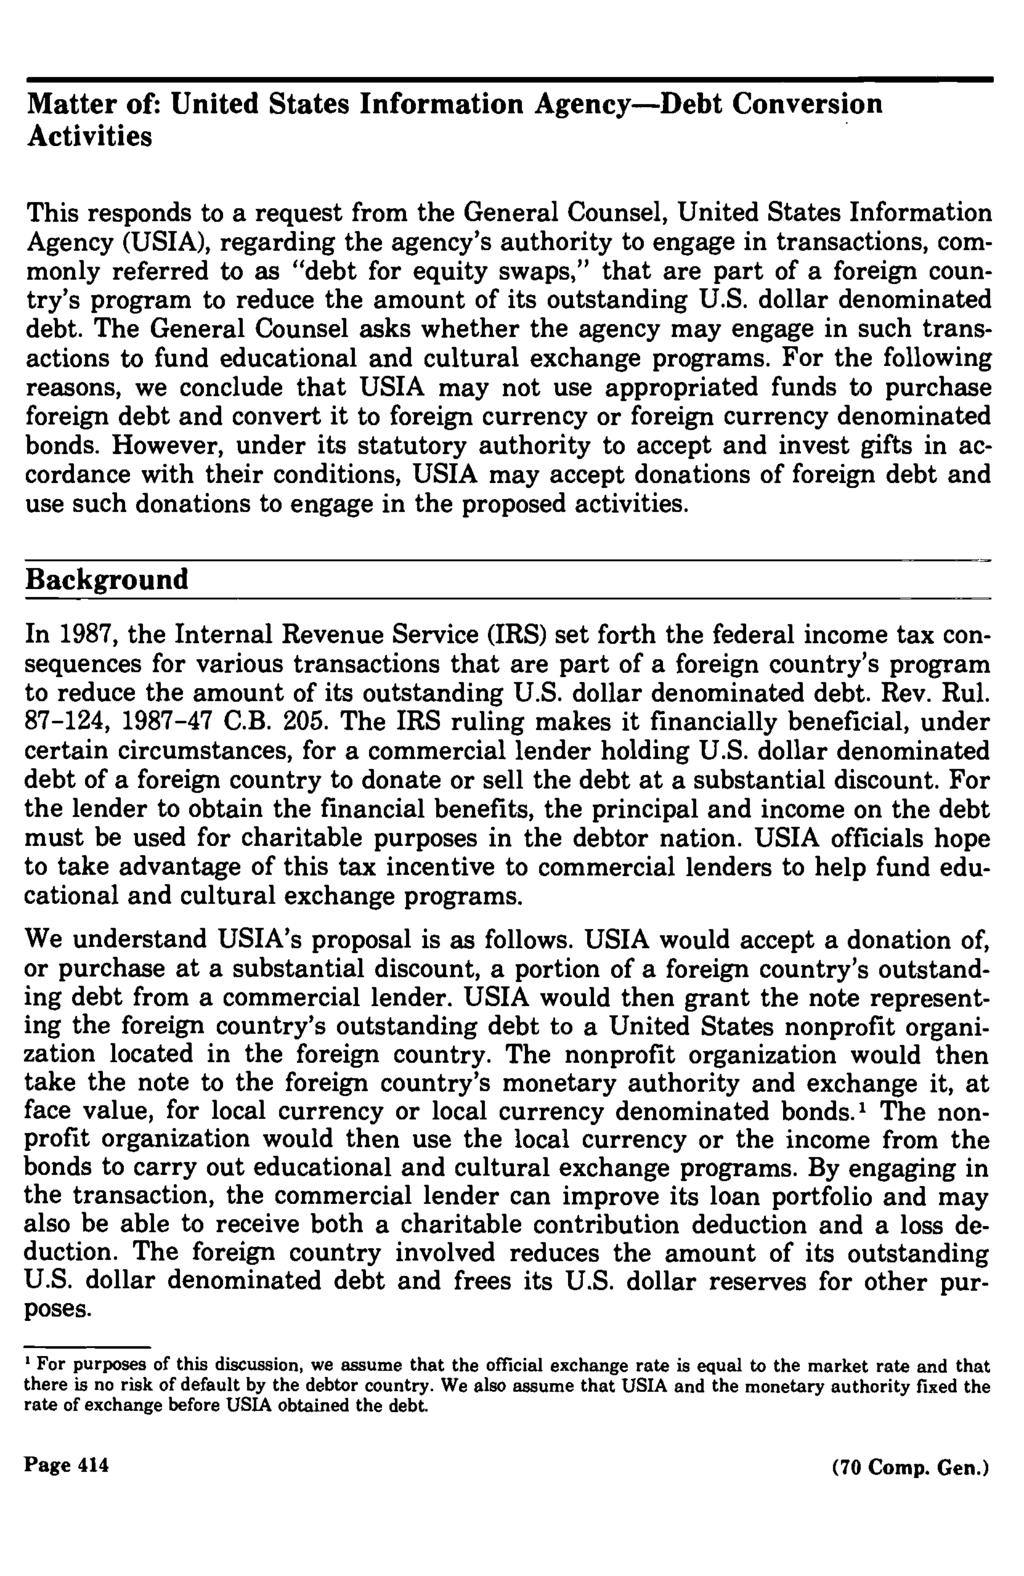 Matter of: United States Information Agency Debt Conversion Activities This responds to a request from the General Counsel, United States Information Agency (USIA), regarding the agency's authority